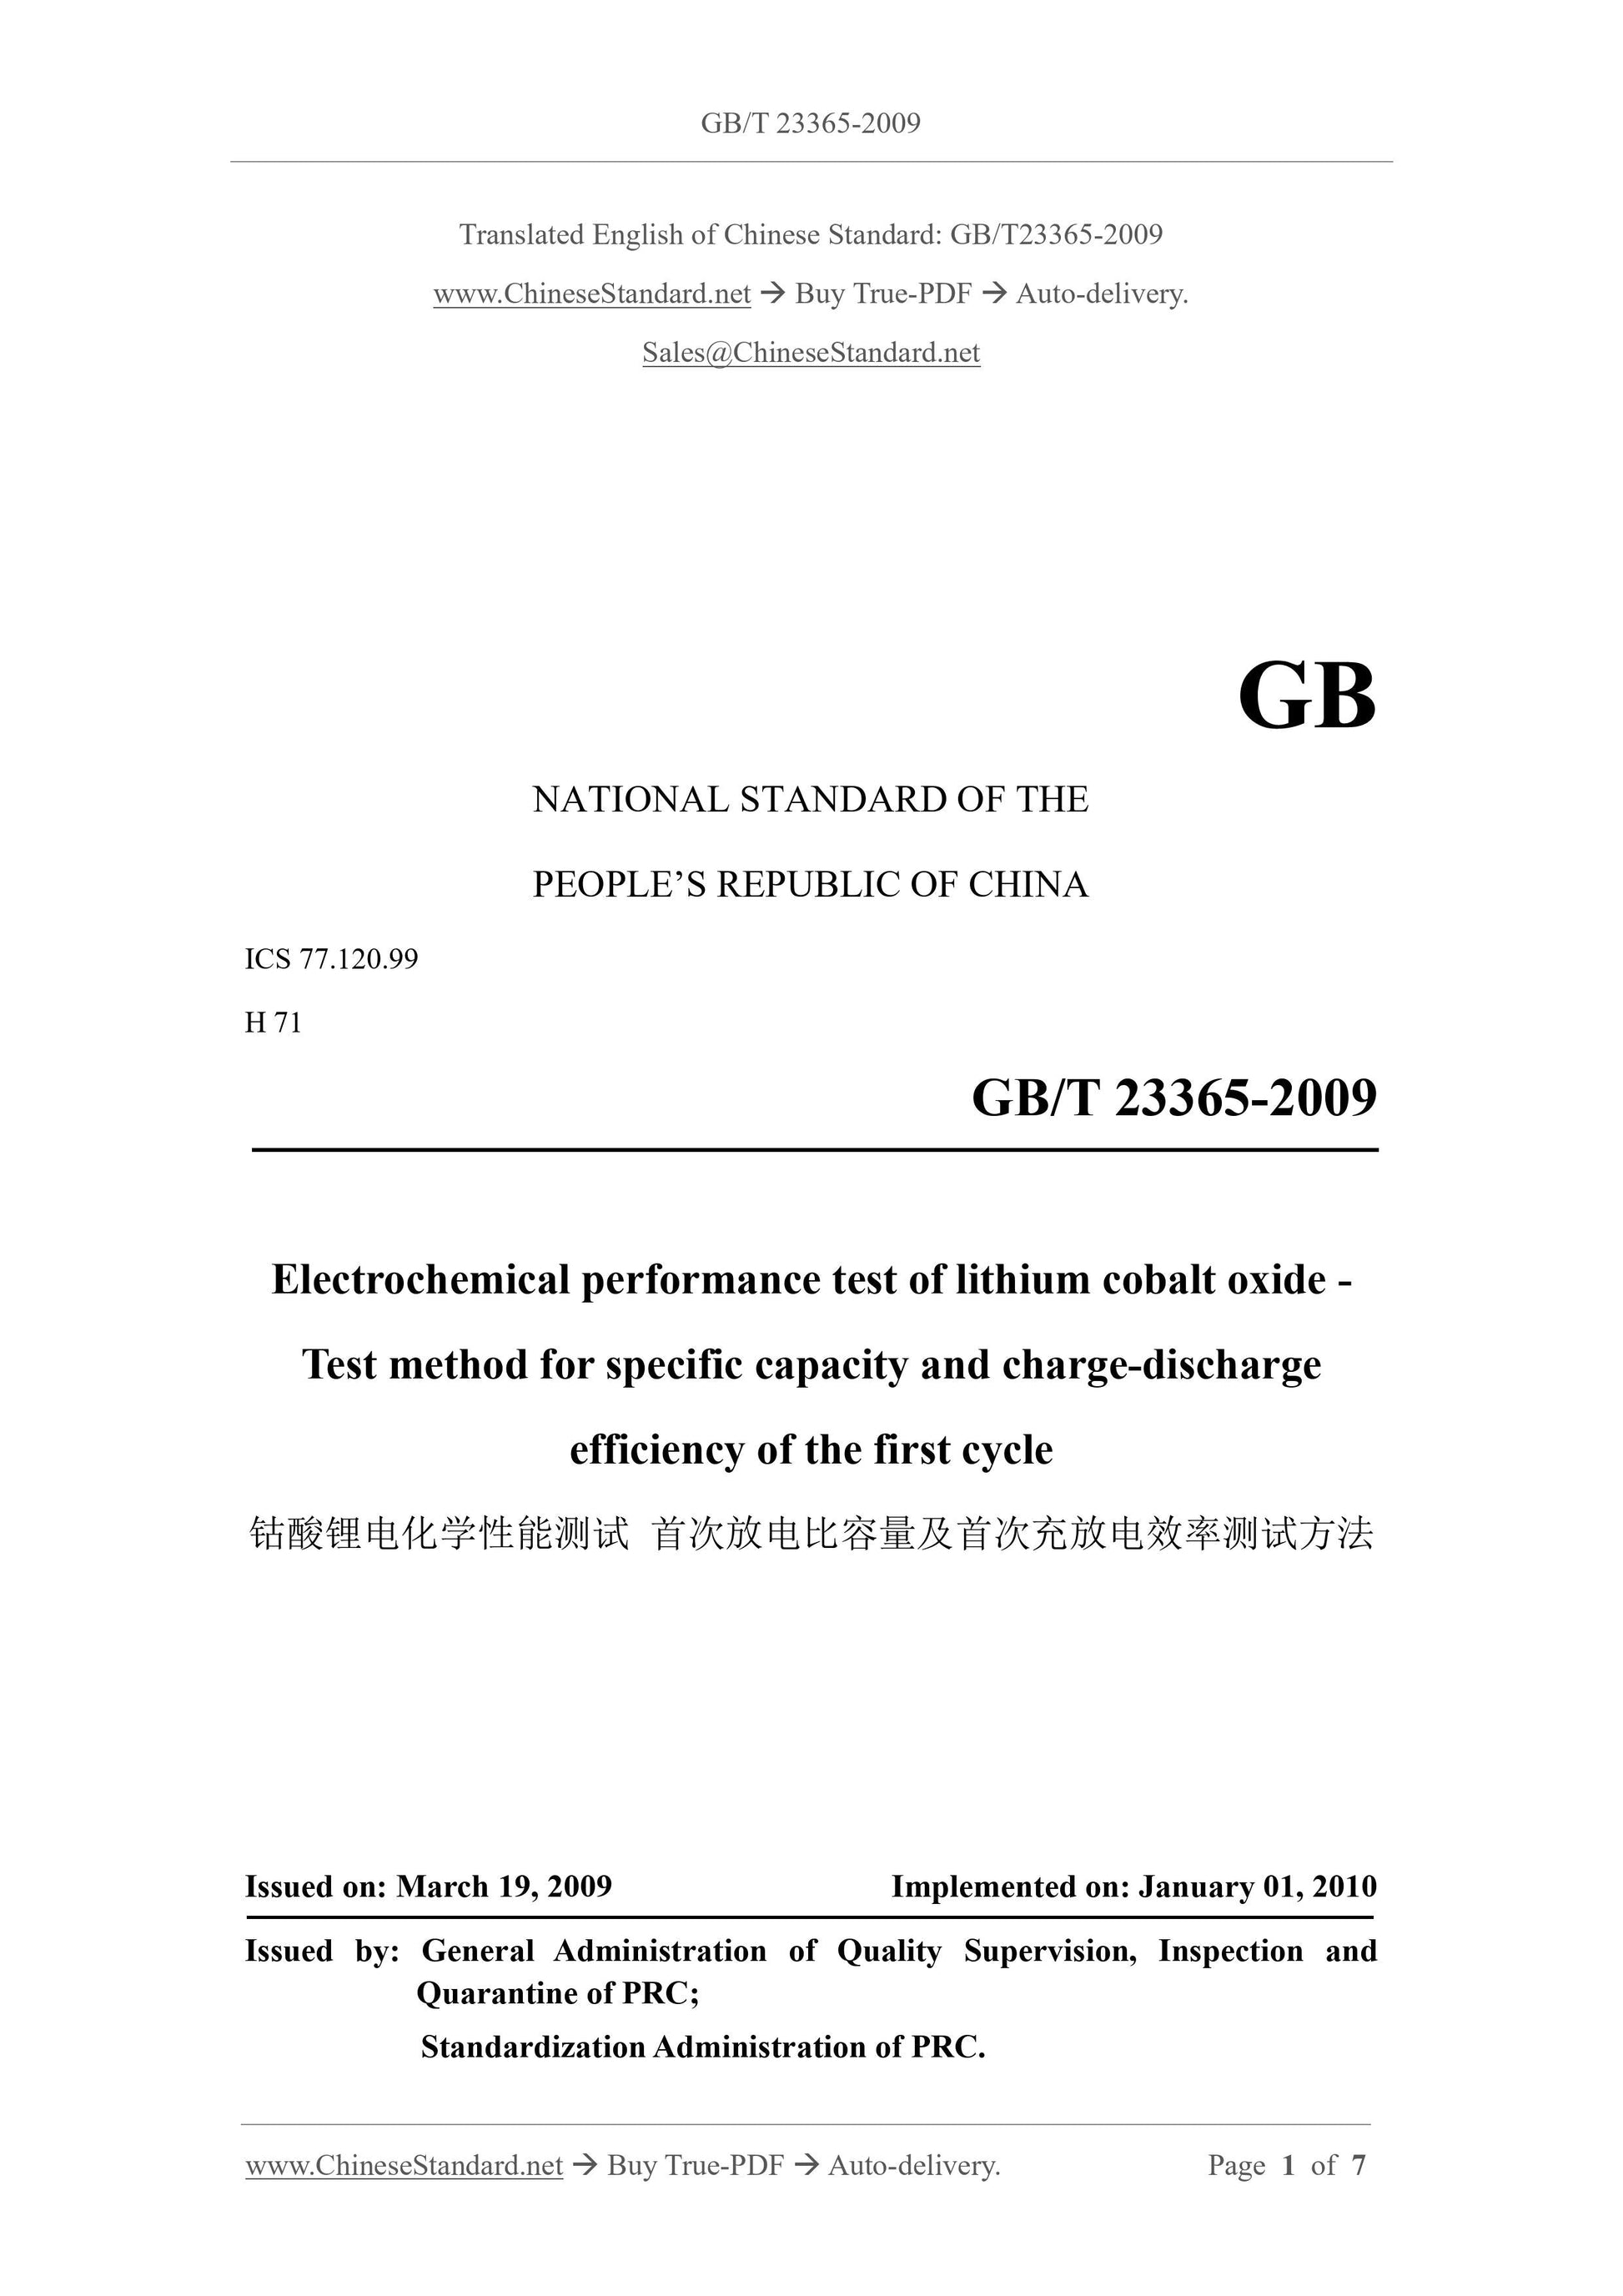 GB/T 23365-2009 Page 1